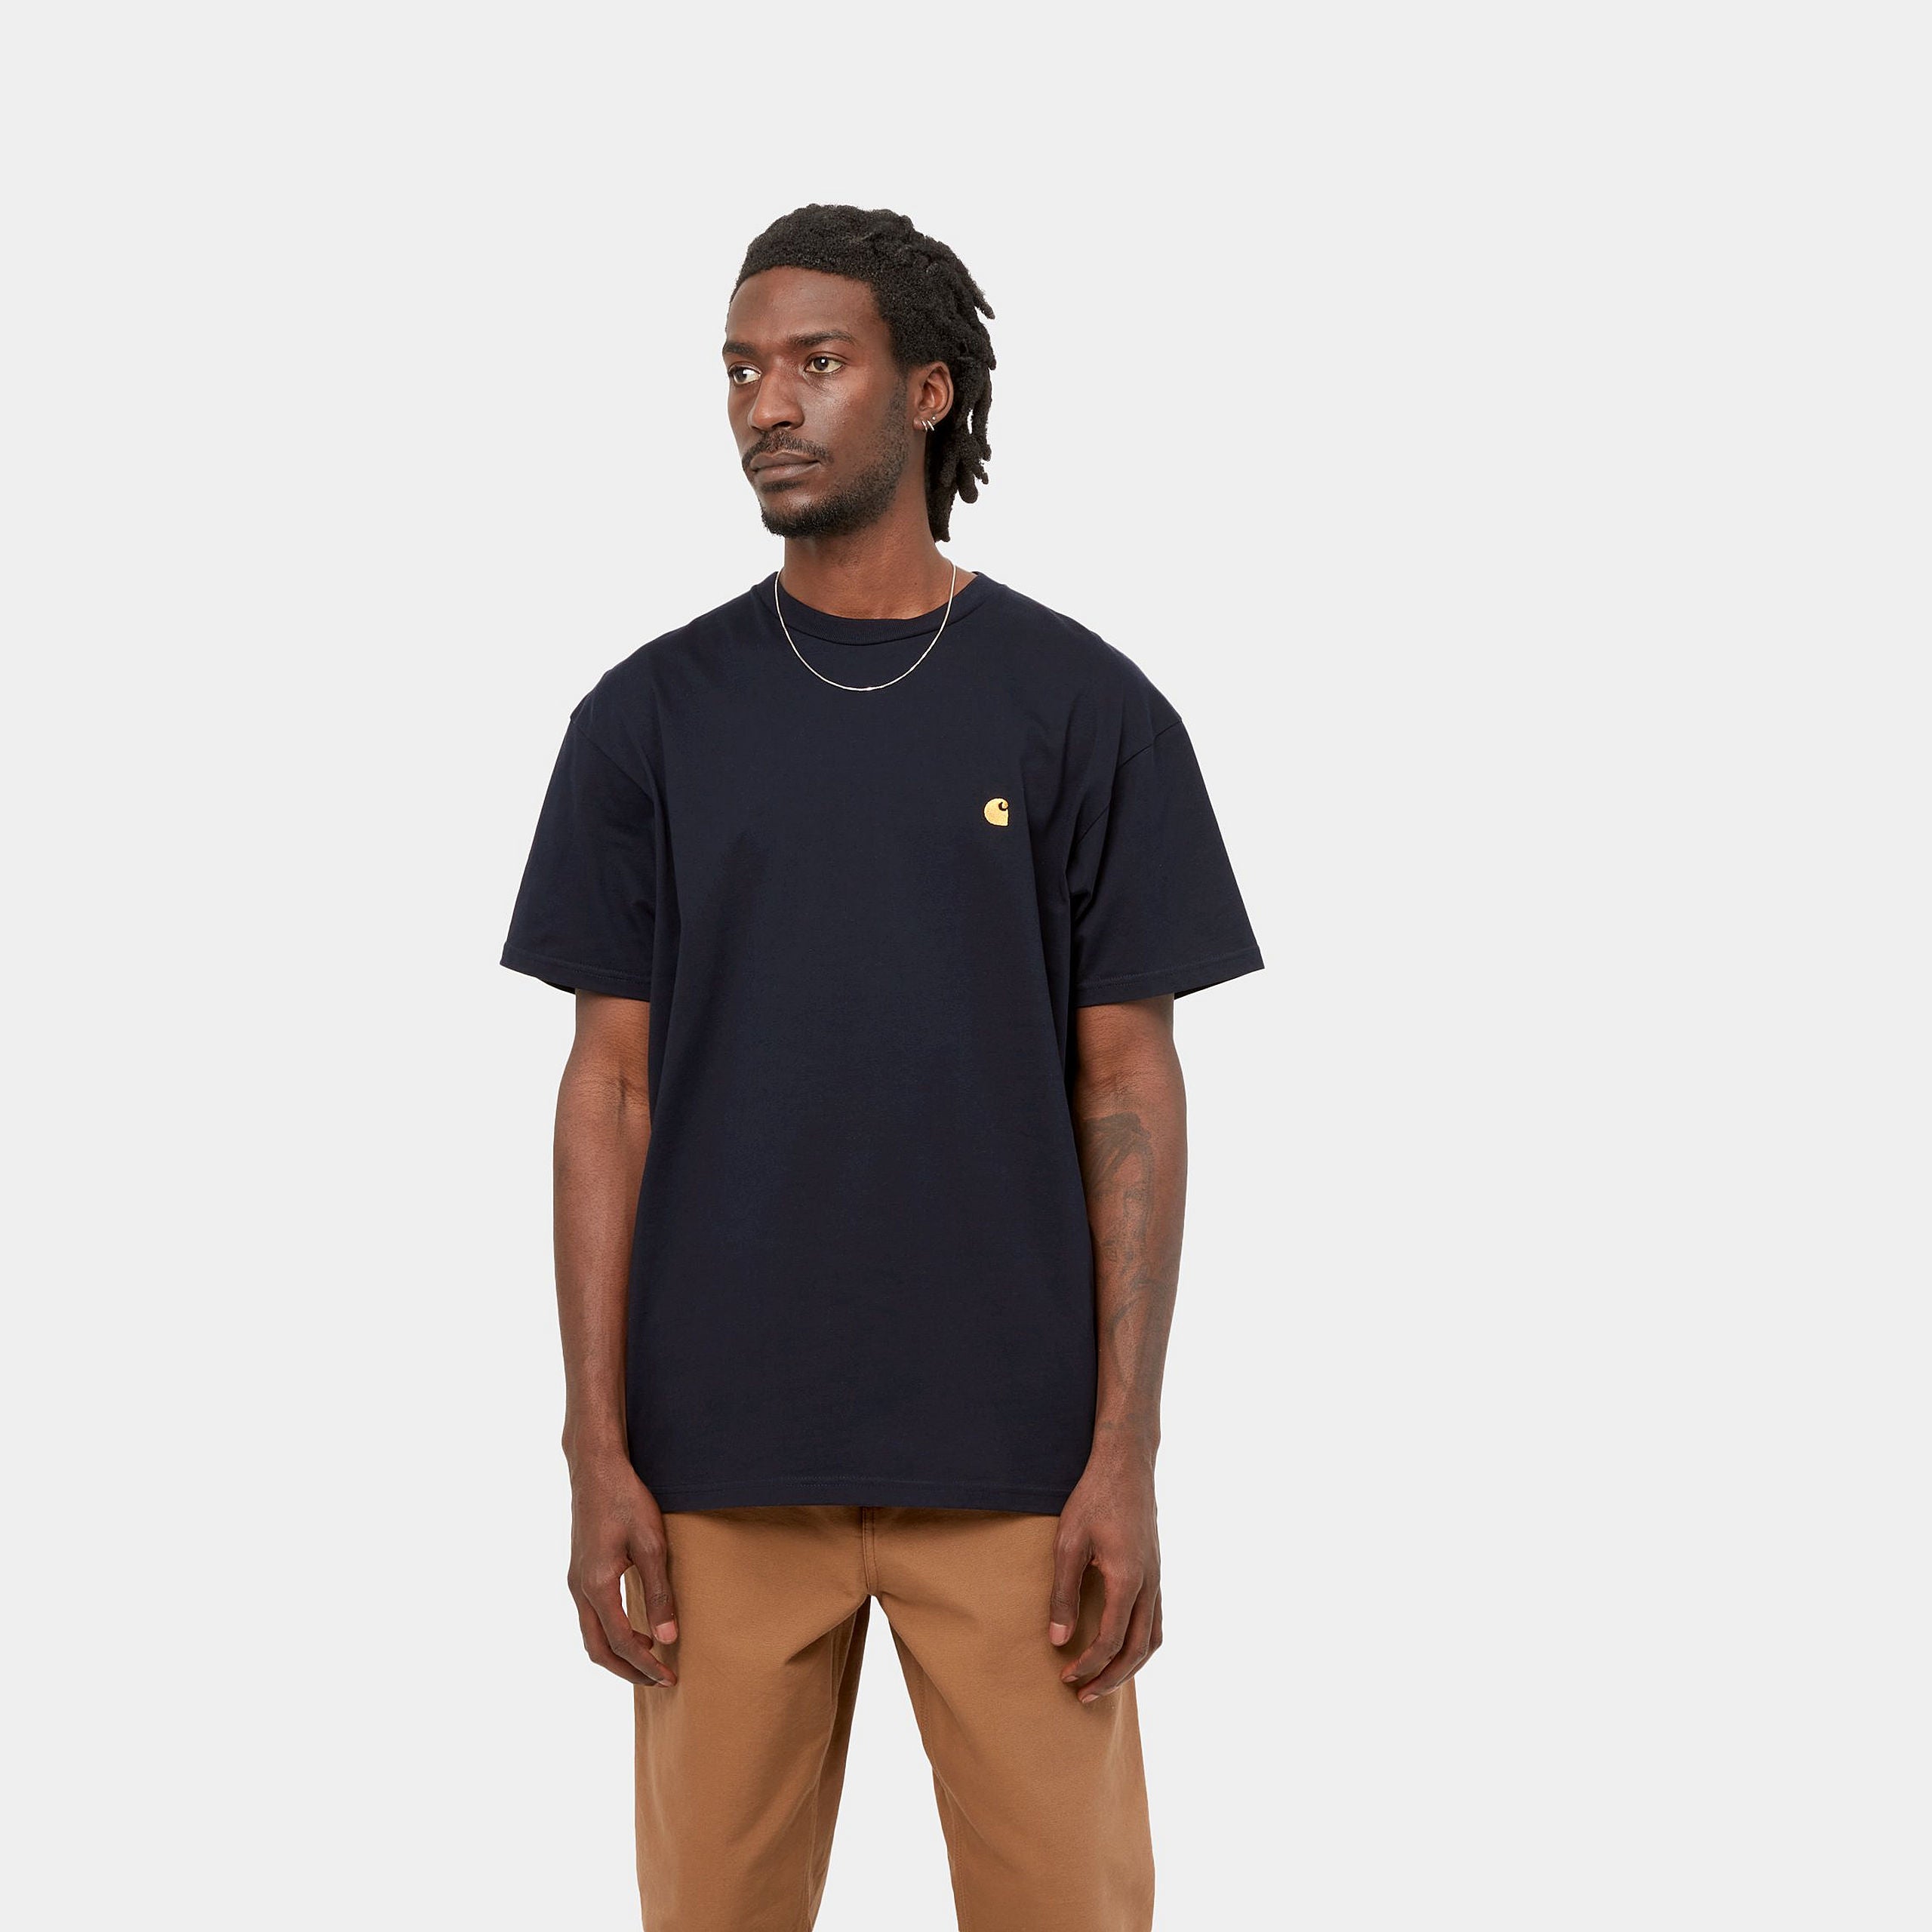 S/S Chase T-Shirt-Dark Navy / Gold - Front View